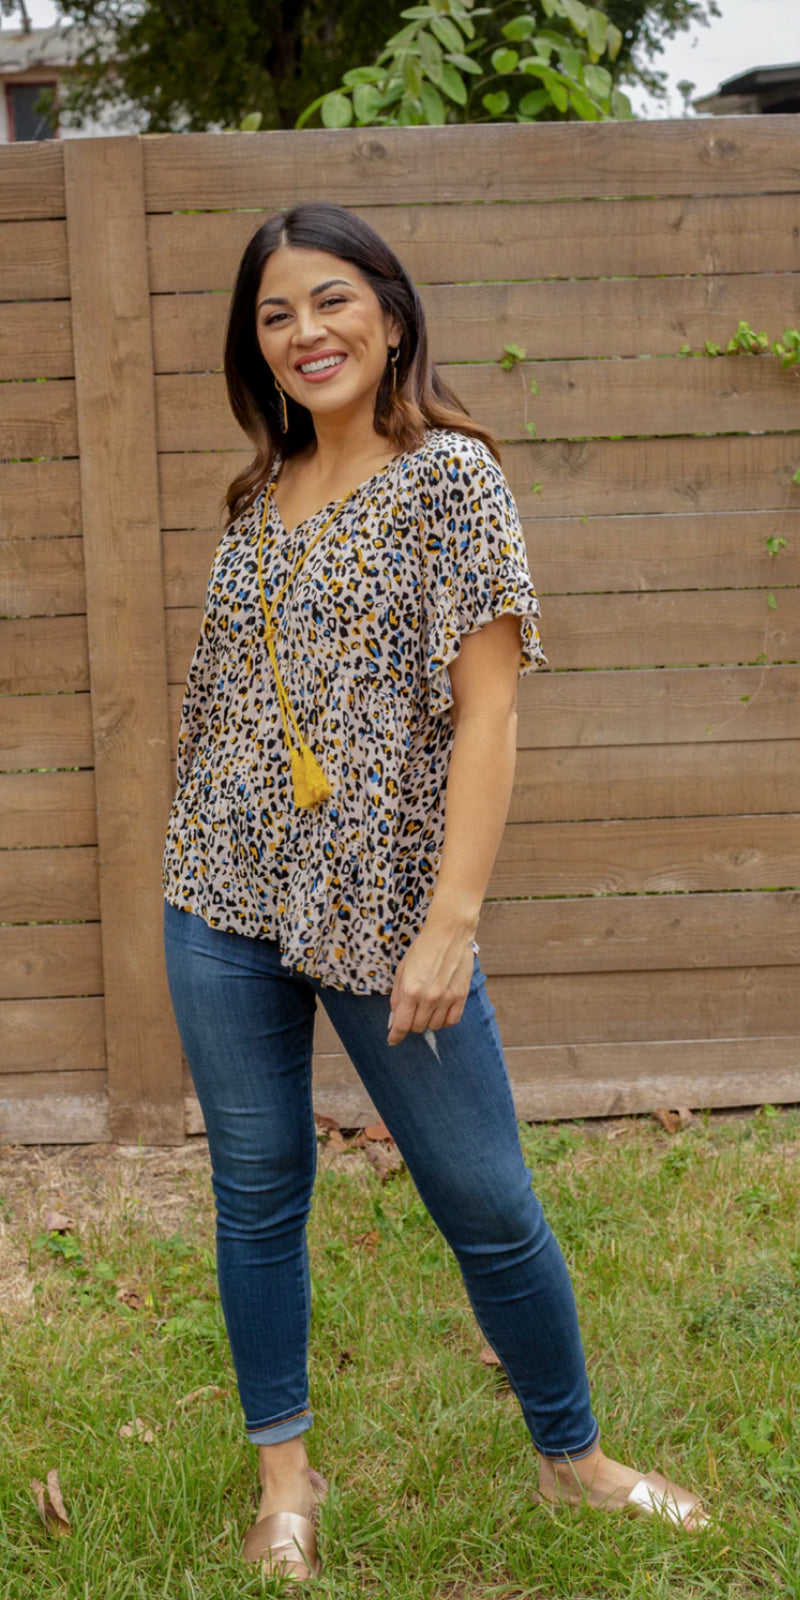 The Spring Fever Leopard Top - Also in Plus Size